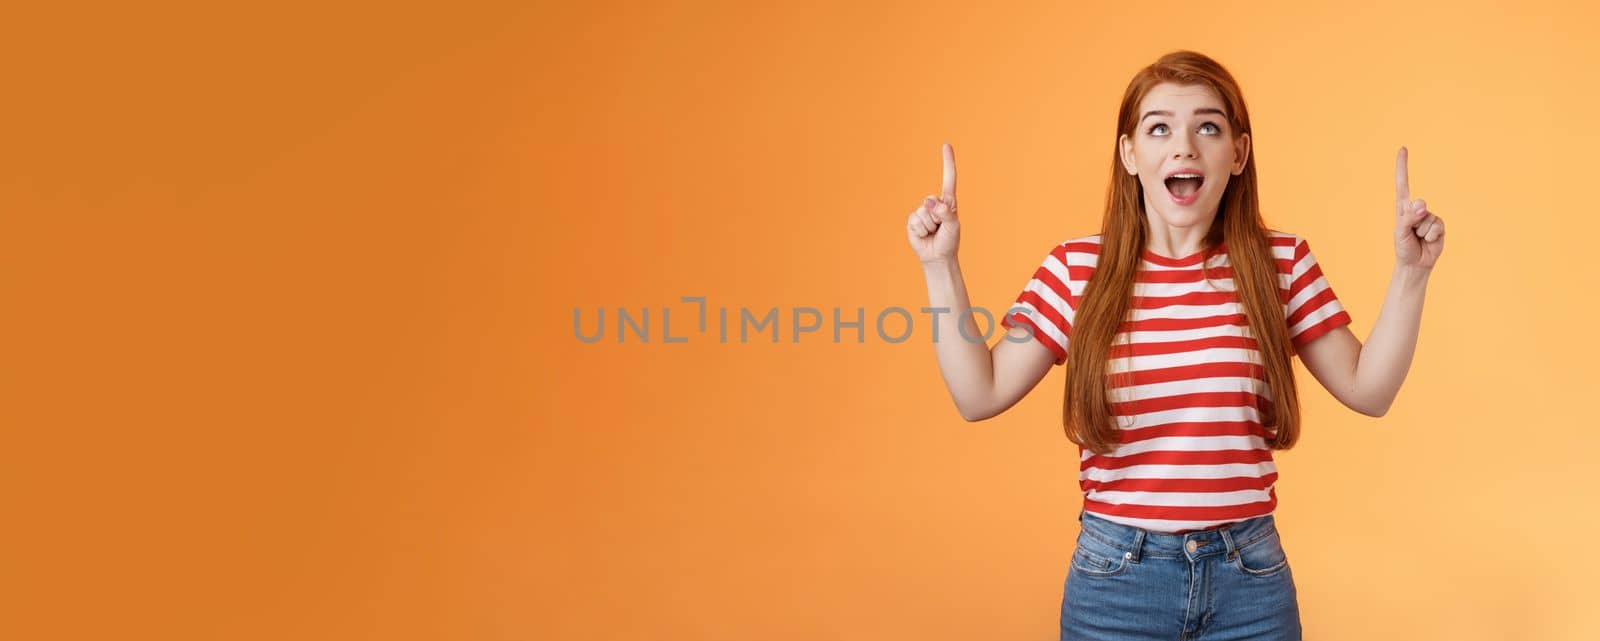 Surprised excited cheerful ginger girl see amazing opportunity, look pointing up amused, drop jaw gasping astonished, pleased awesome cool advertisement, reacting thrilled top copy space.